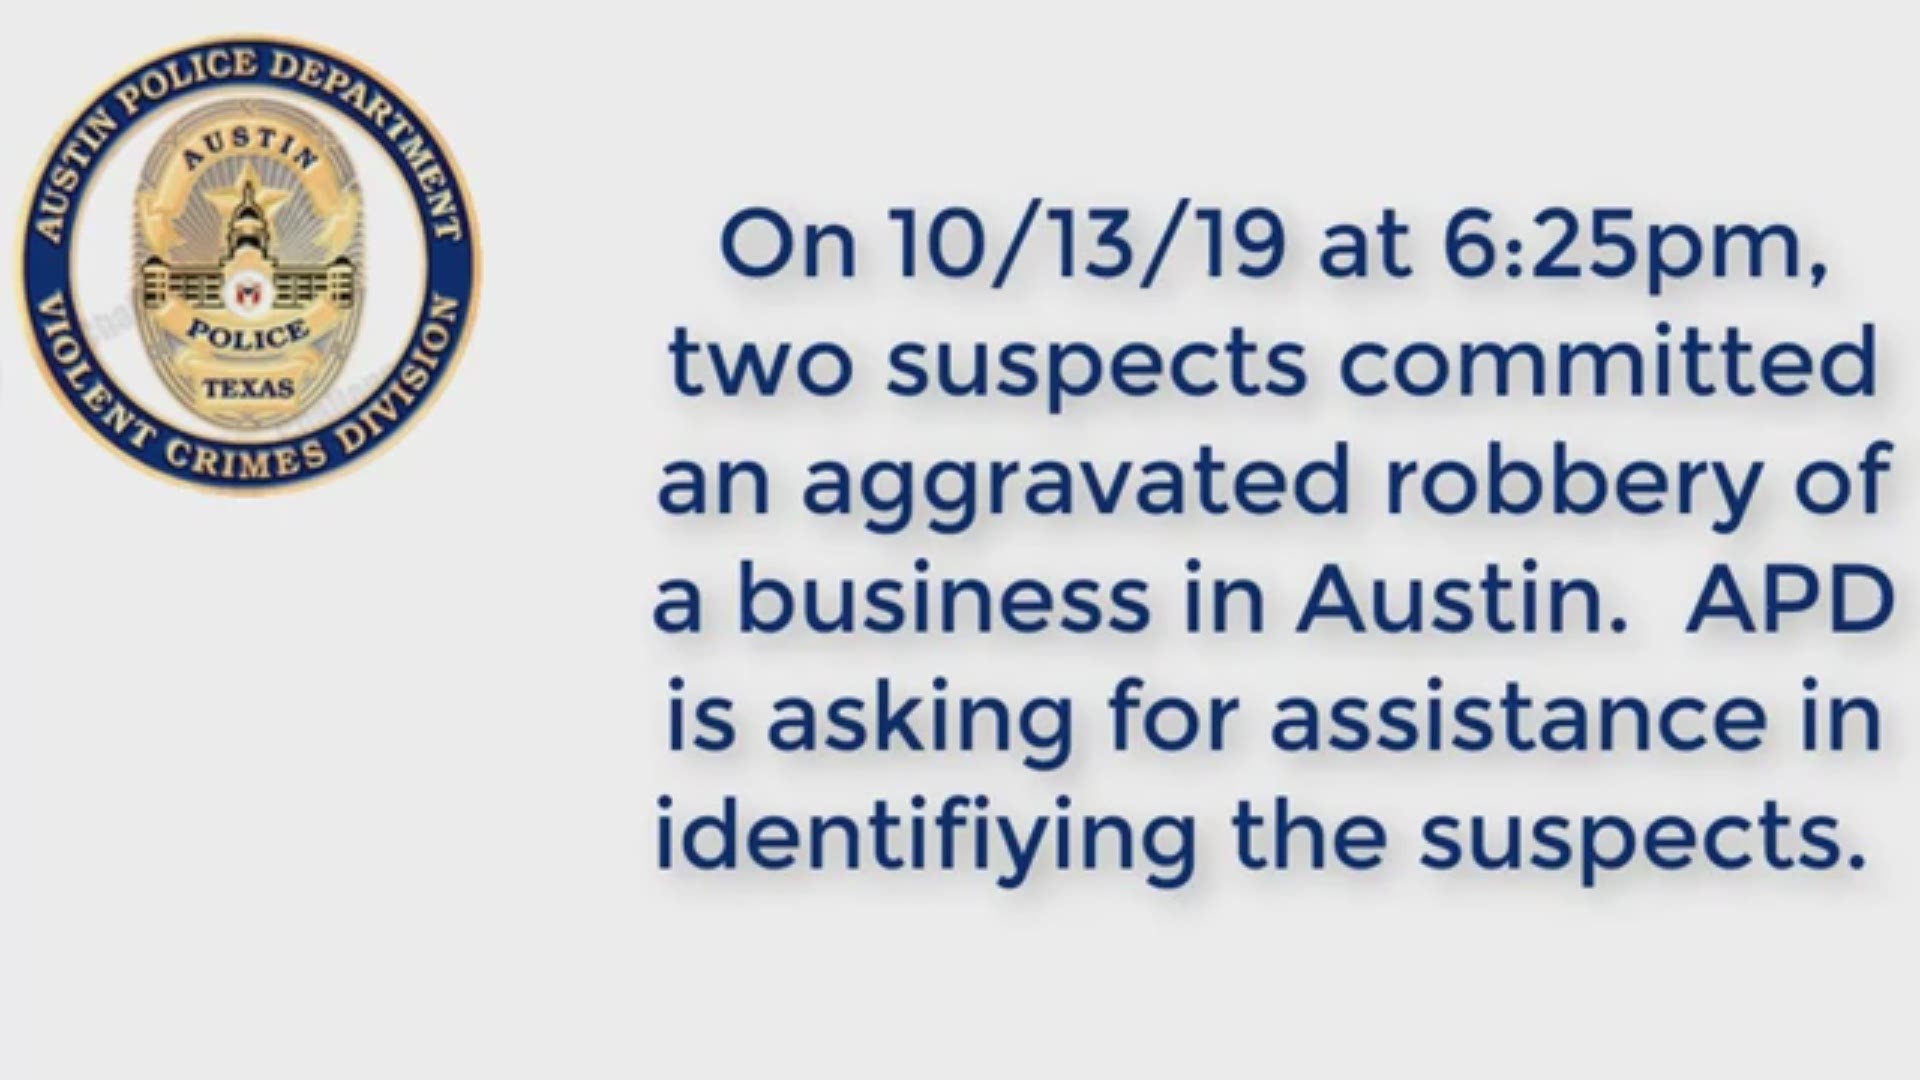 The incident occurred at Iris Jewelry Store on Parkfield Drive in Austin on Oct. 13, 2019.